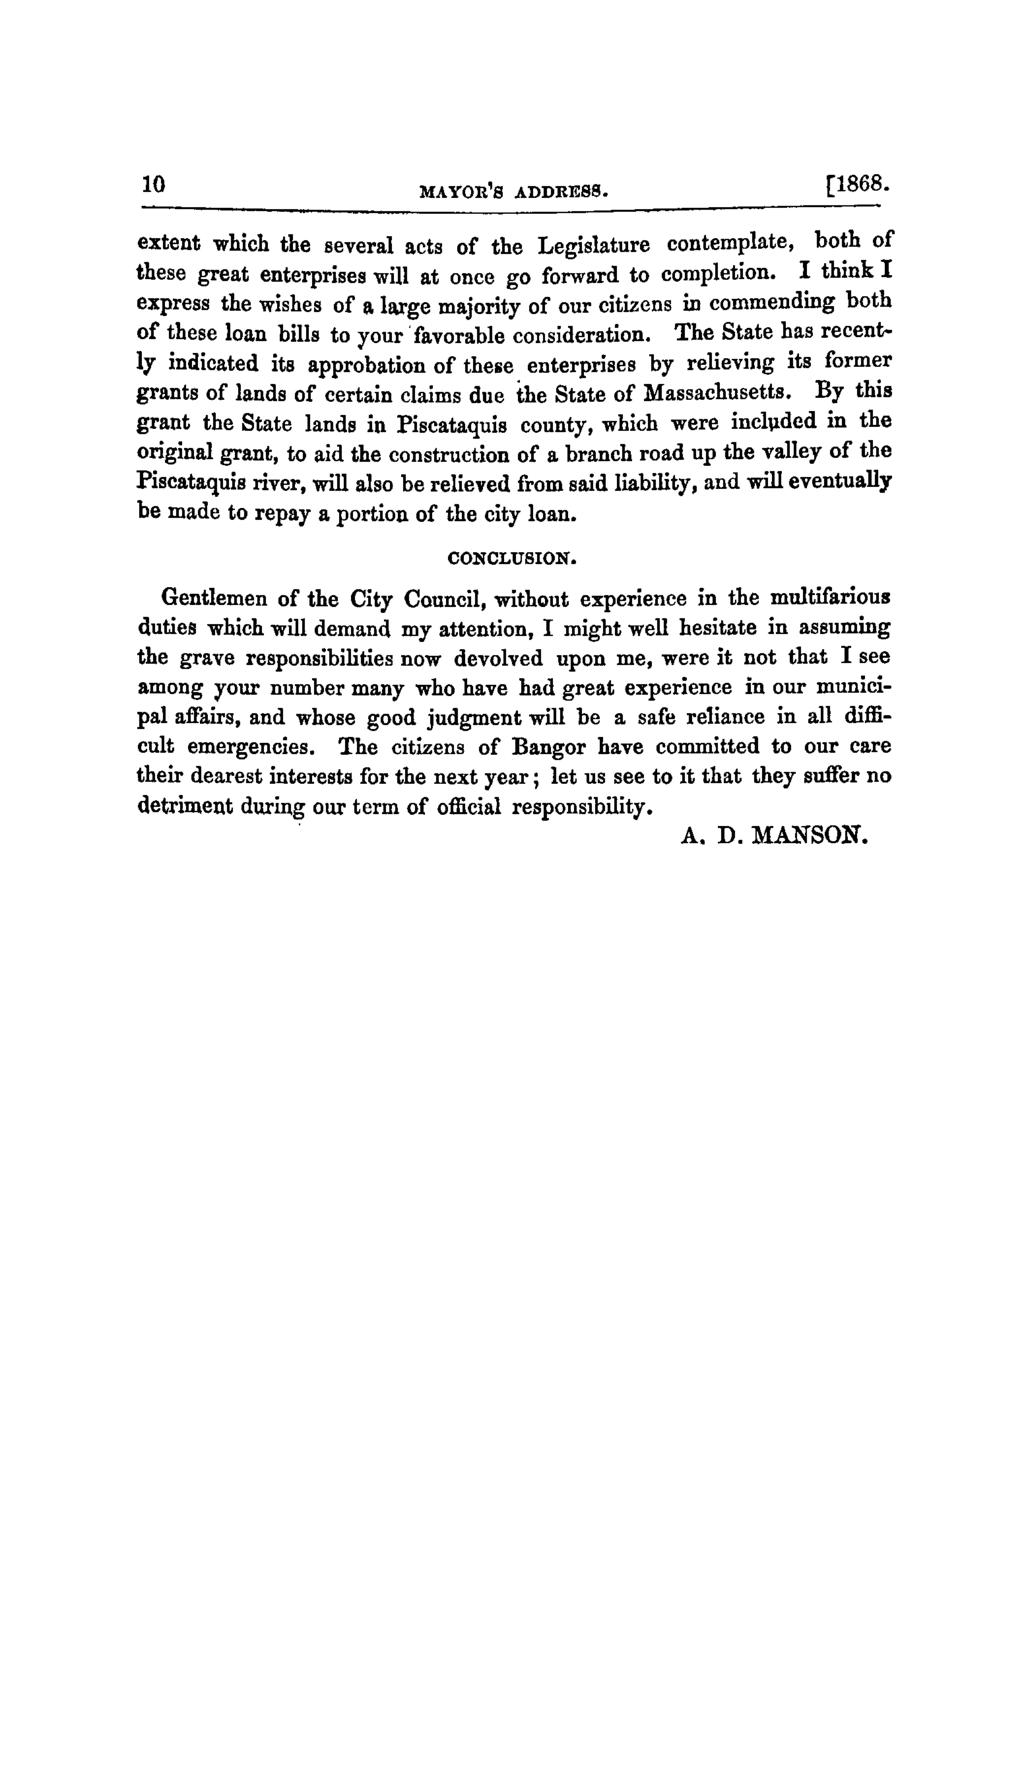 *Q MAYOR'S ADDRESS. [1868. extent which the several acts of the Legislature contemplate, both of these great enterprises will at once go forward to completion.